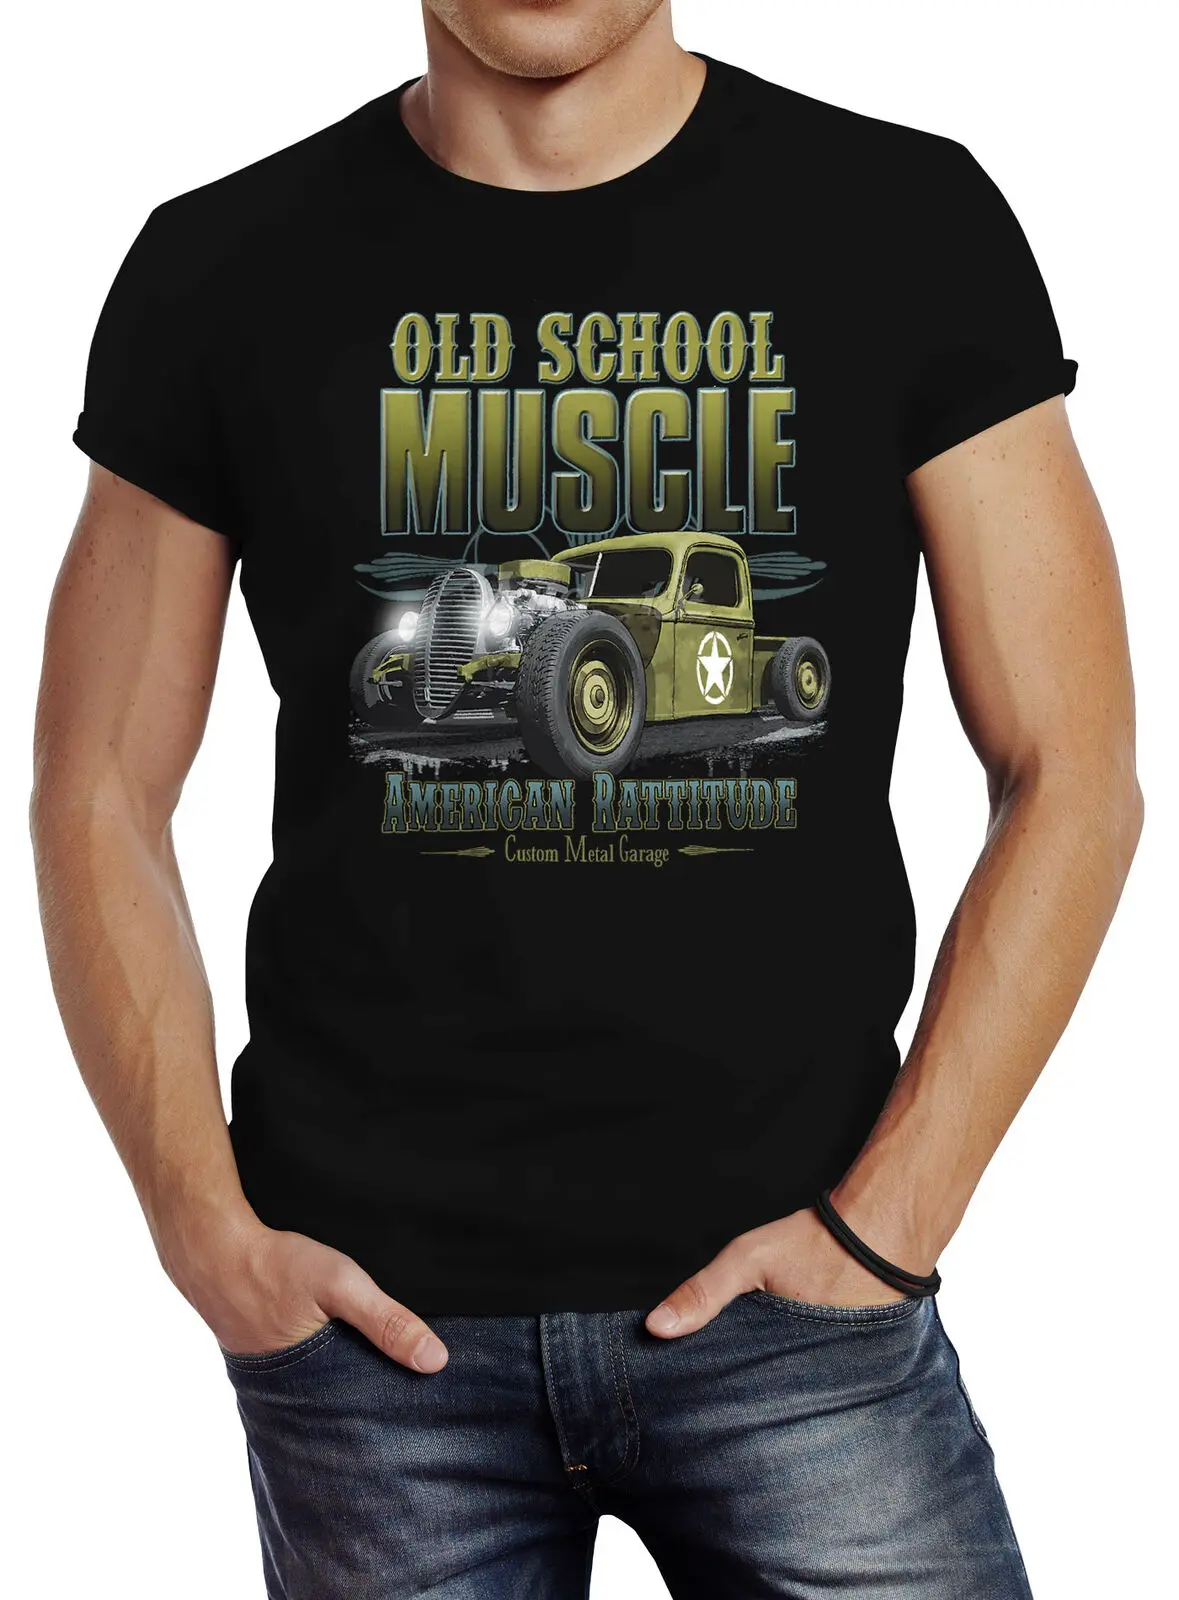 

Military Oldschool American Muscle Car Slim Fit Men's 100% Cotton Casual T-shirts Loose Top Size S-3XL